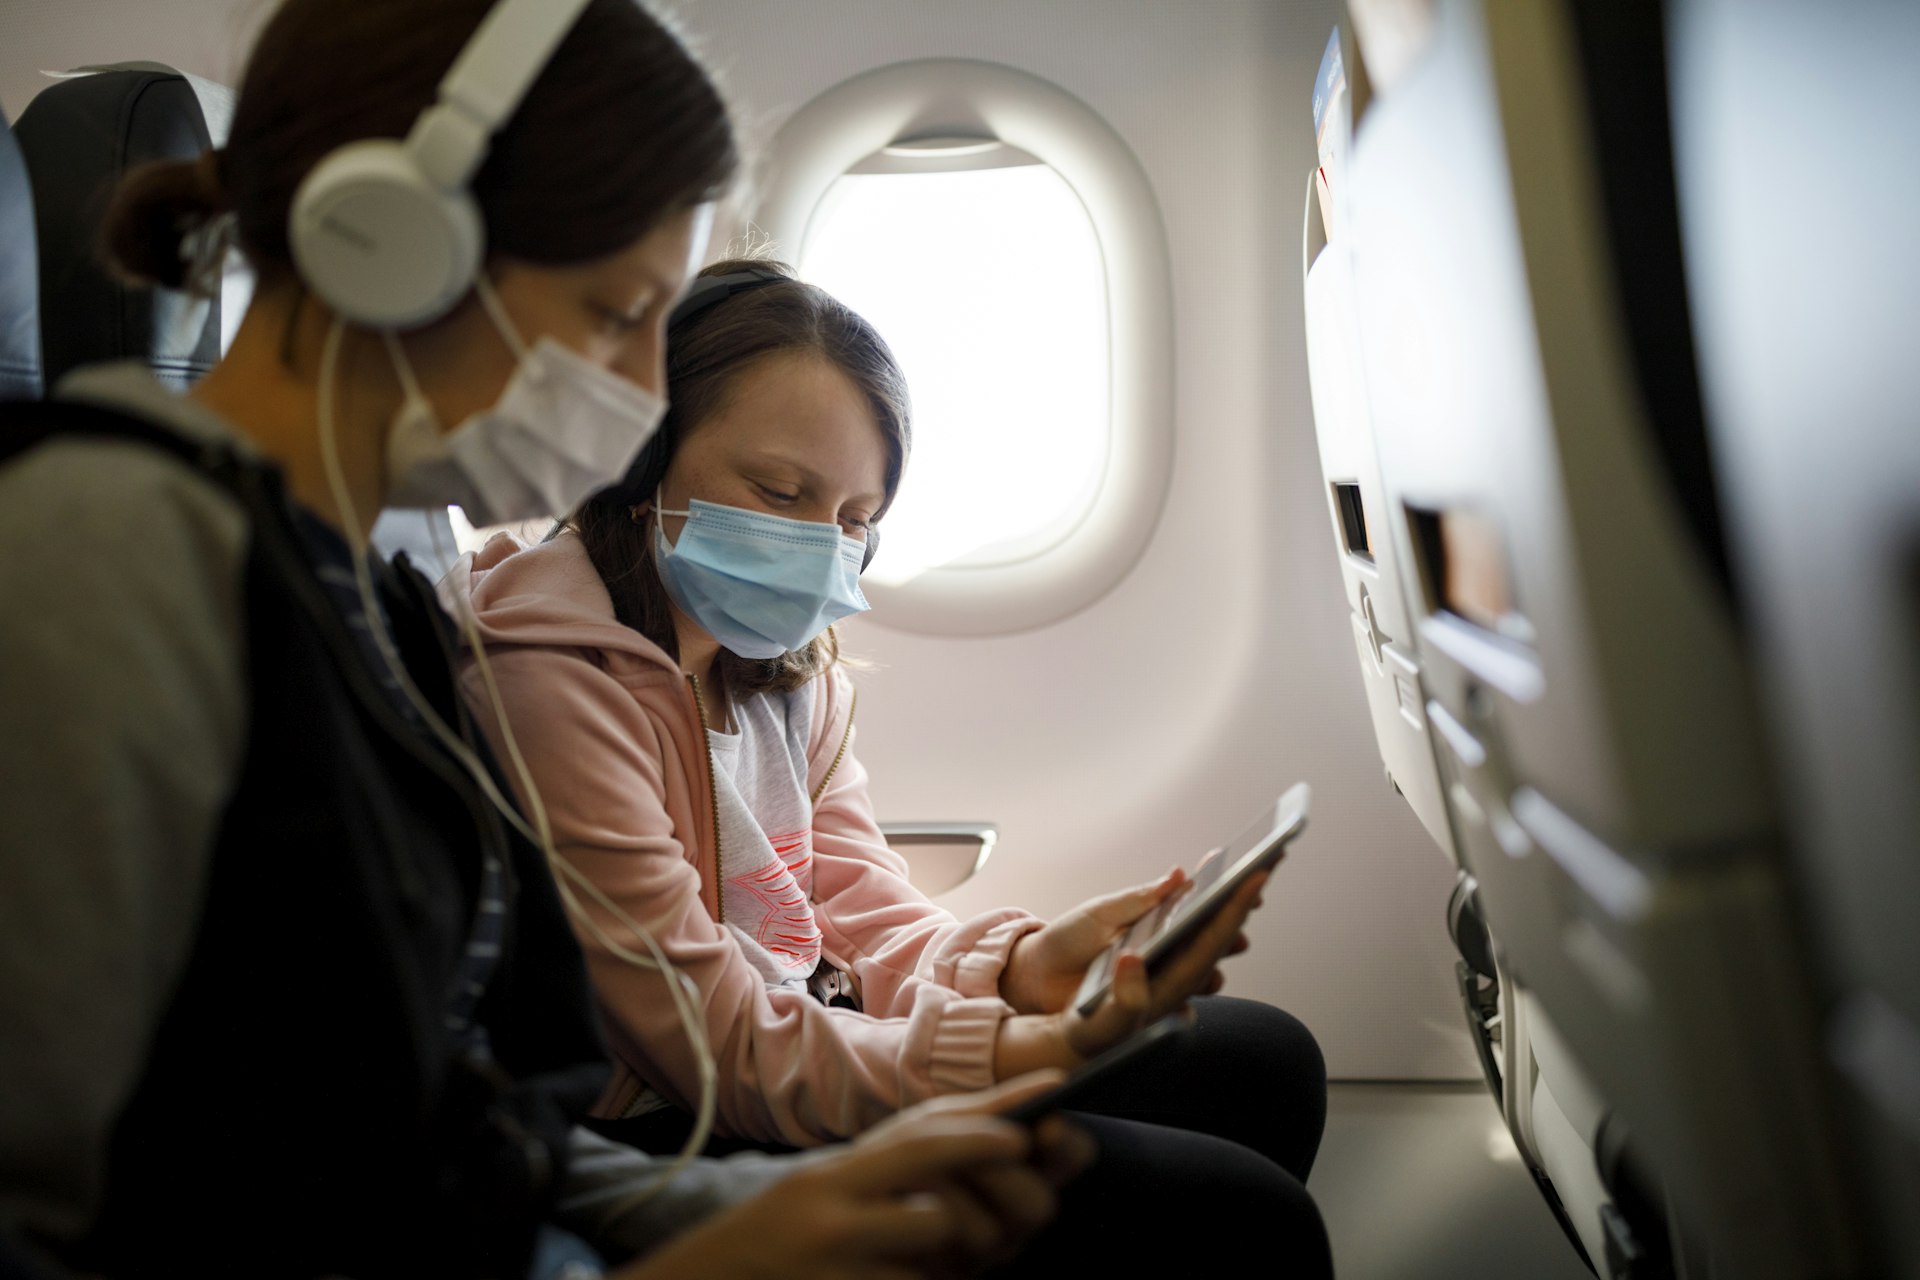 Masks on planes are now optional